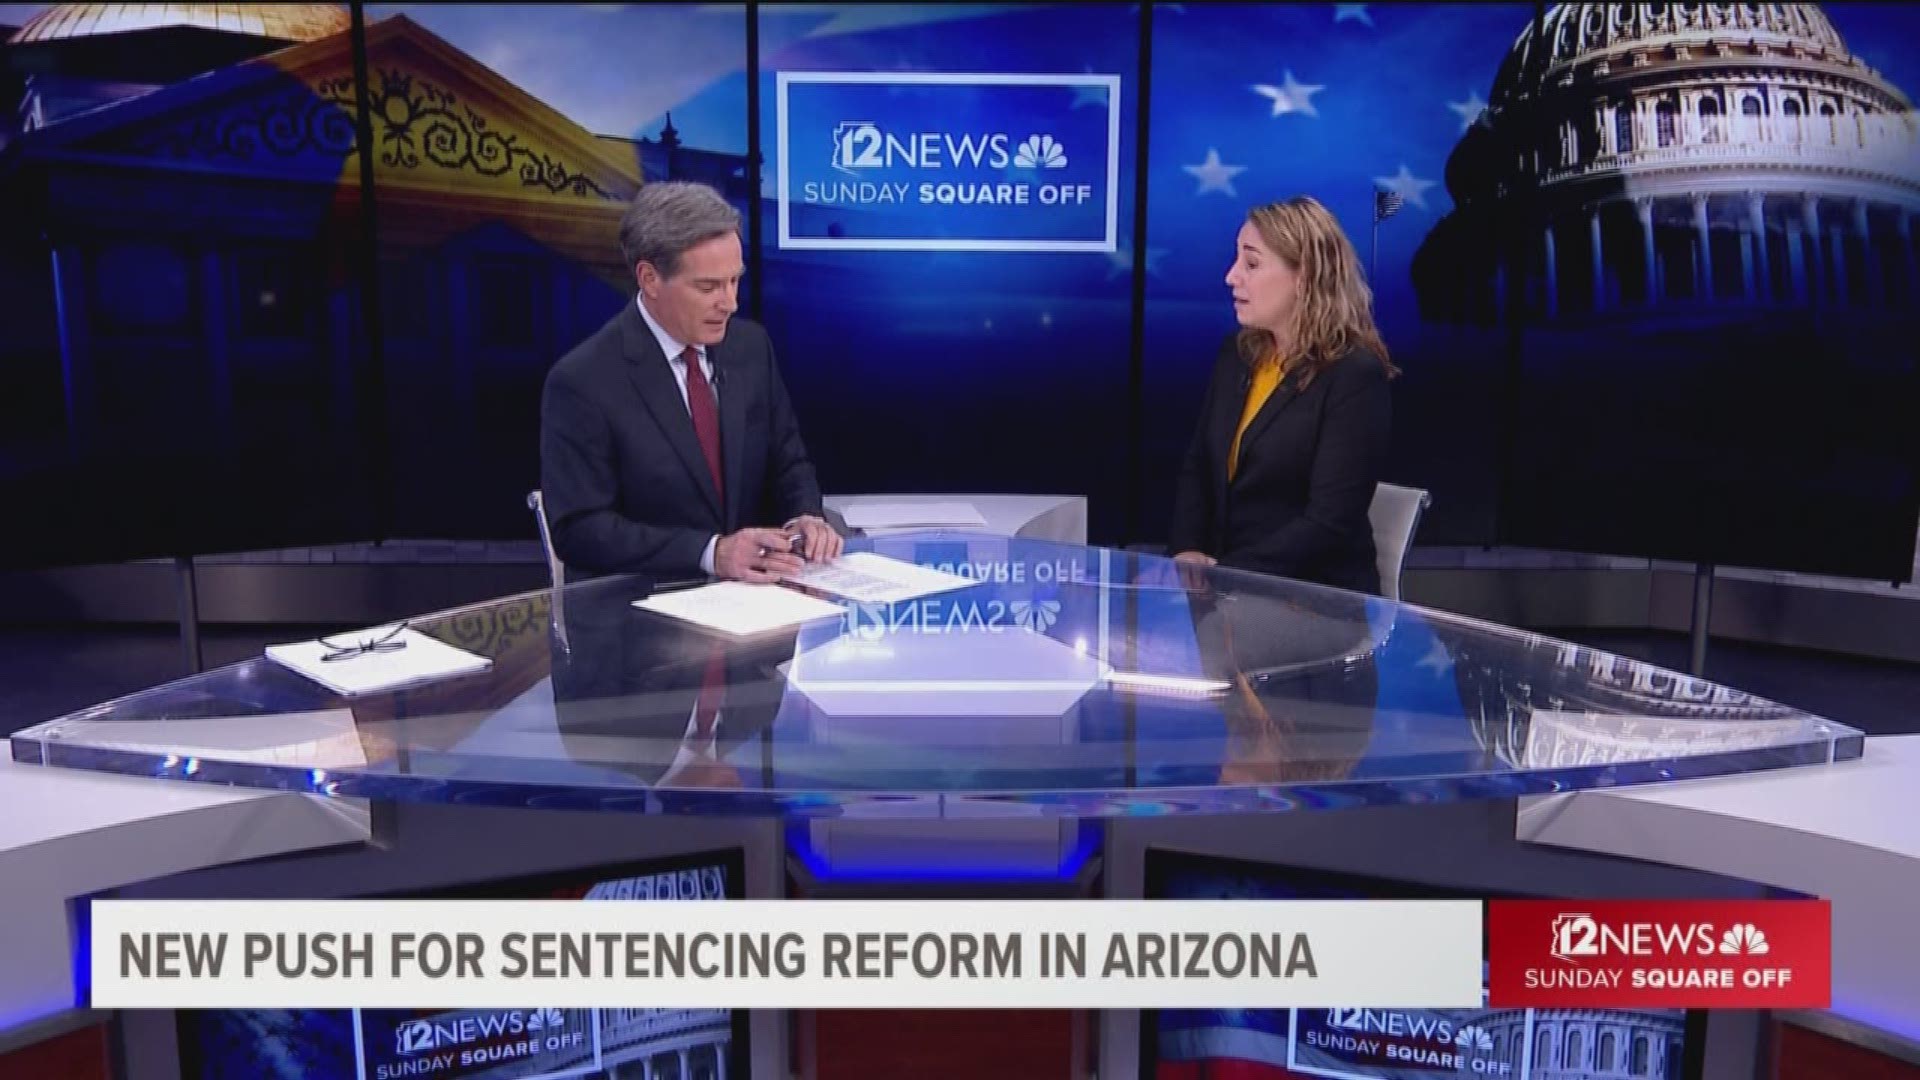 Arizona's ranks among the top five states in the the country for it incarceration rate. "Orange is the New Black" author Piper Kerman leads a gathering Tuesday at the State Capitol to kick off a bipartisan push for sentencing reform. Caroline Isaacs, director of the American Friends Service Committee-Arizona, explains the agenda for sentencing reform and responds to opponents like Maricopa County Attorney who claim her organization is peddling a "myth."